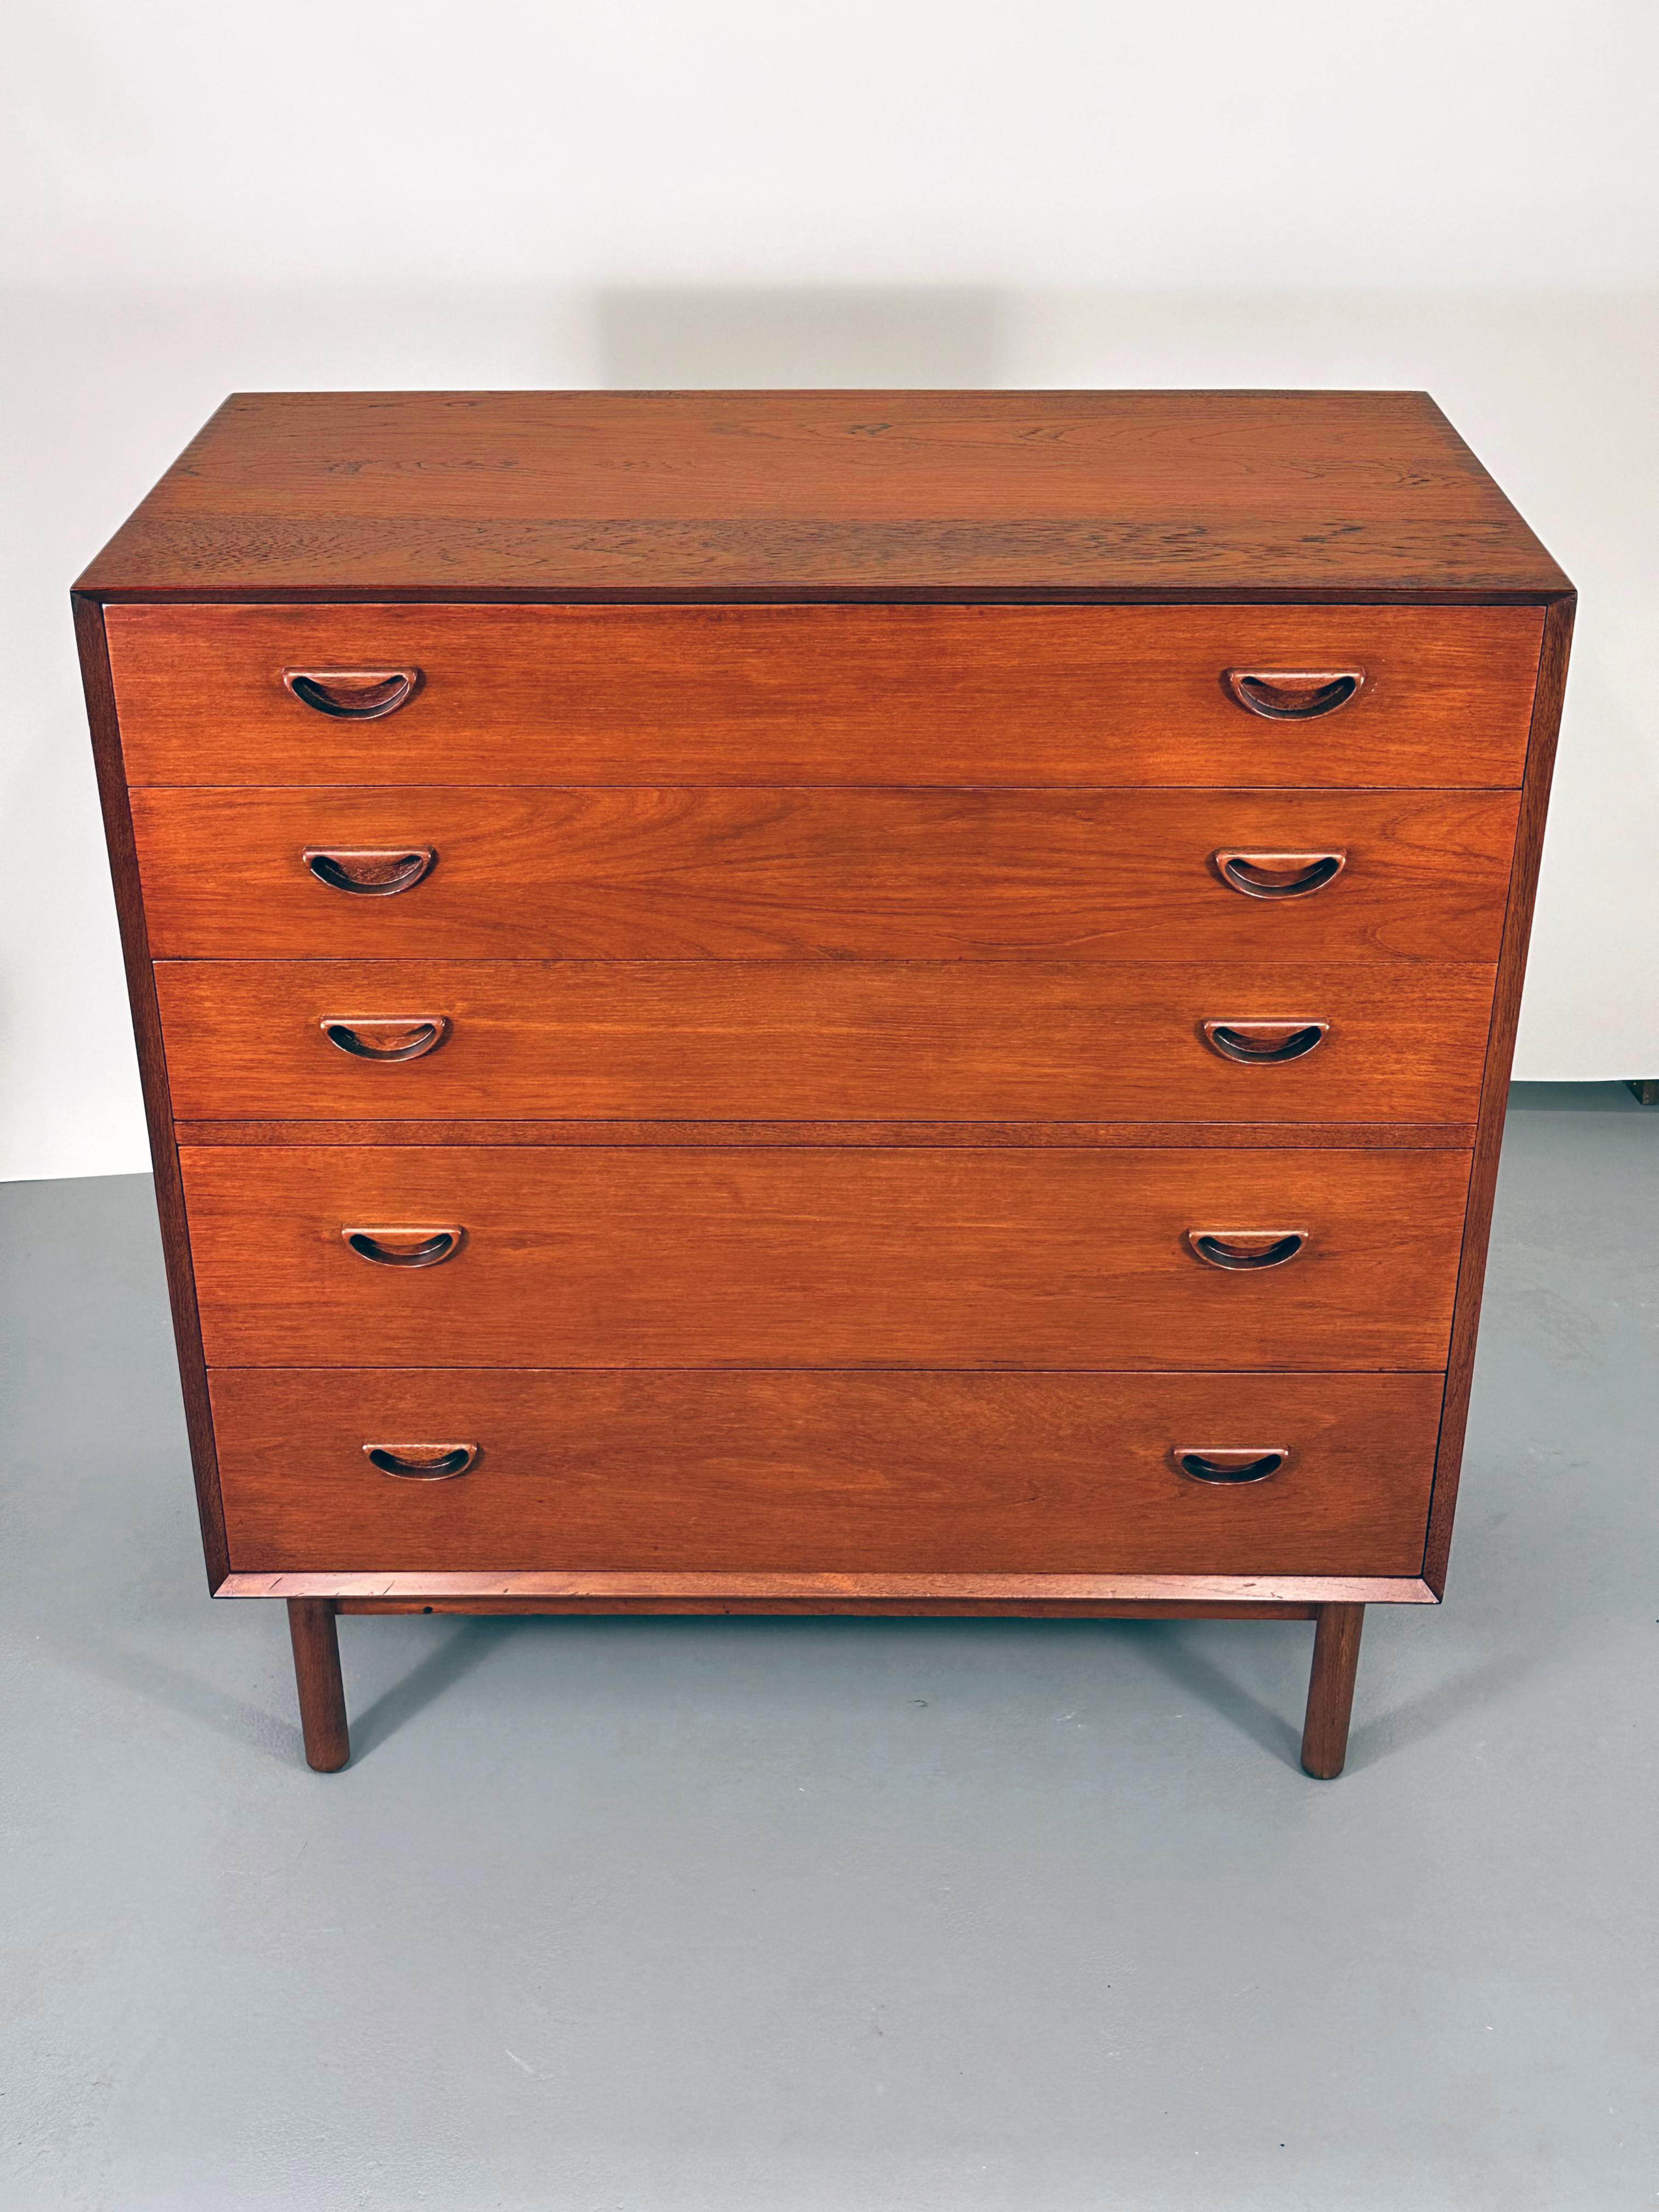 A pair of five-drawer cabinets by Peter Hvidt & Orla Mølgaard-Nielsen for Soborg Mobler.

These chests are made from solid Burmese teak with beveled edges and finger joint assembly. 

Produced in Denmark in the 1950s, they are designed to be